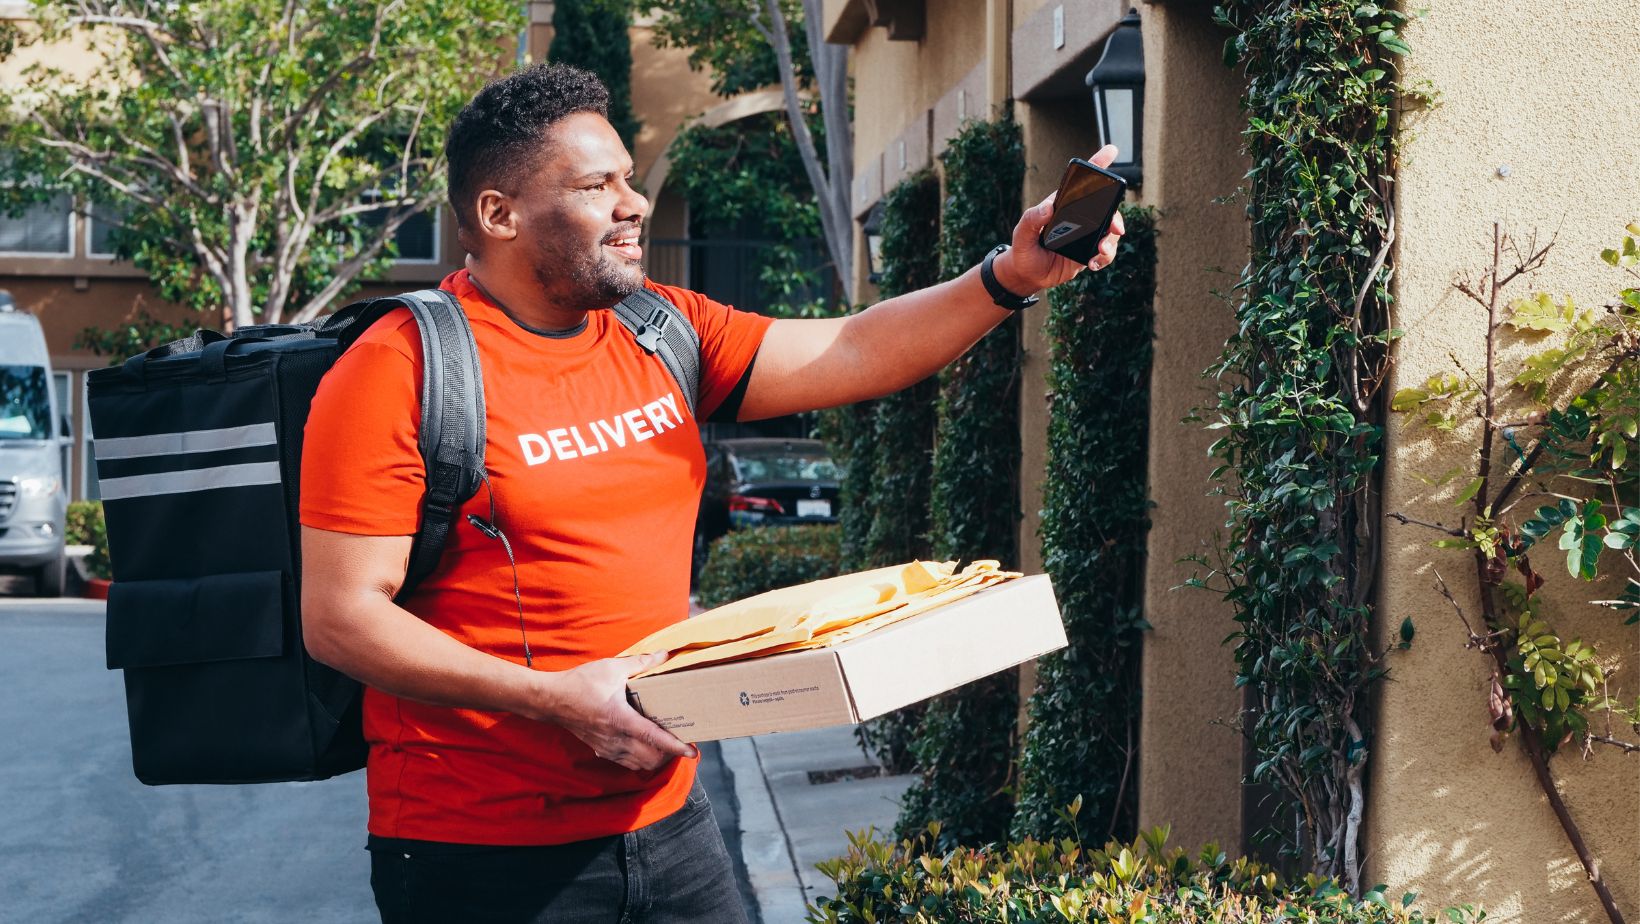 no one is happy with NYC's $18 delivery minimum wage